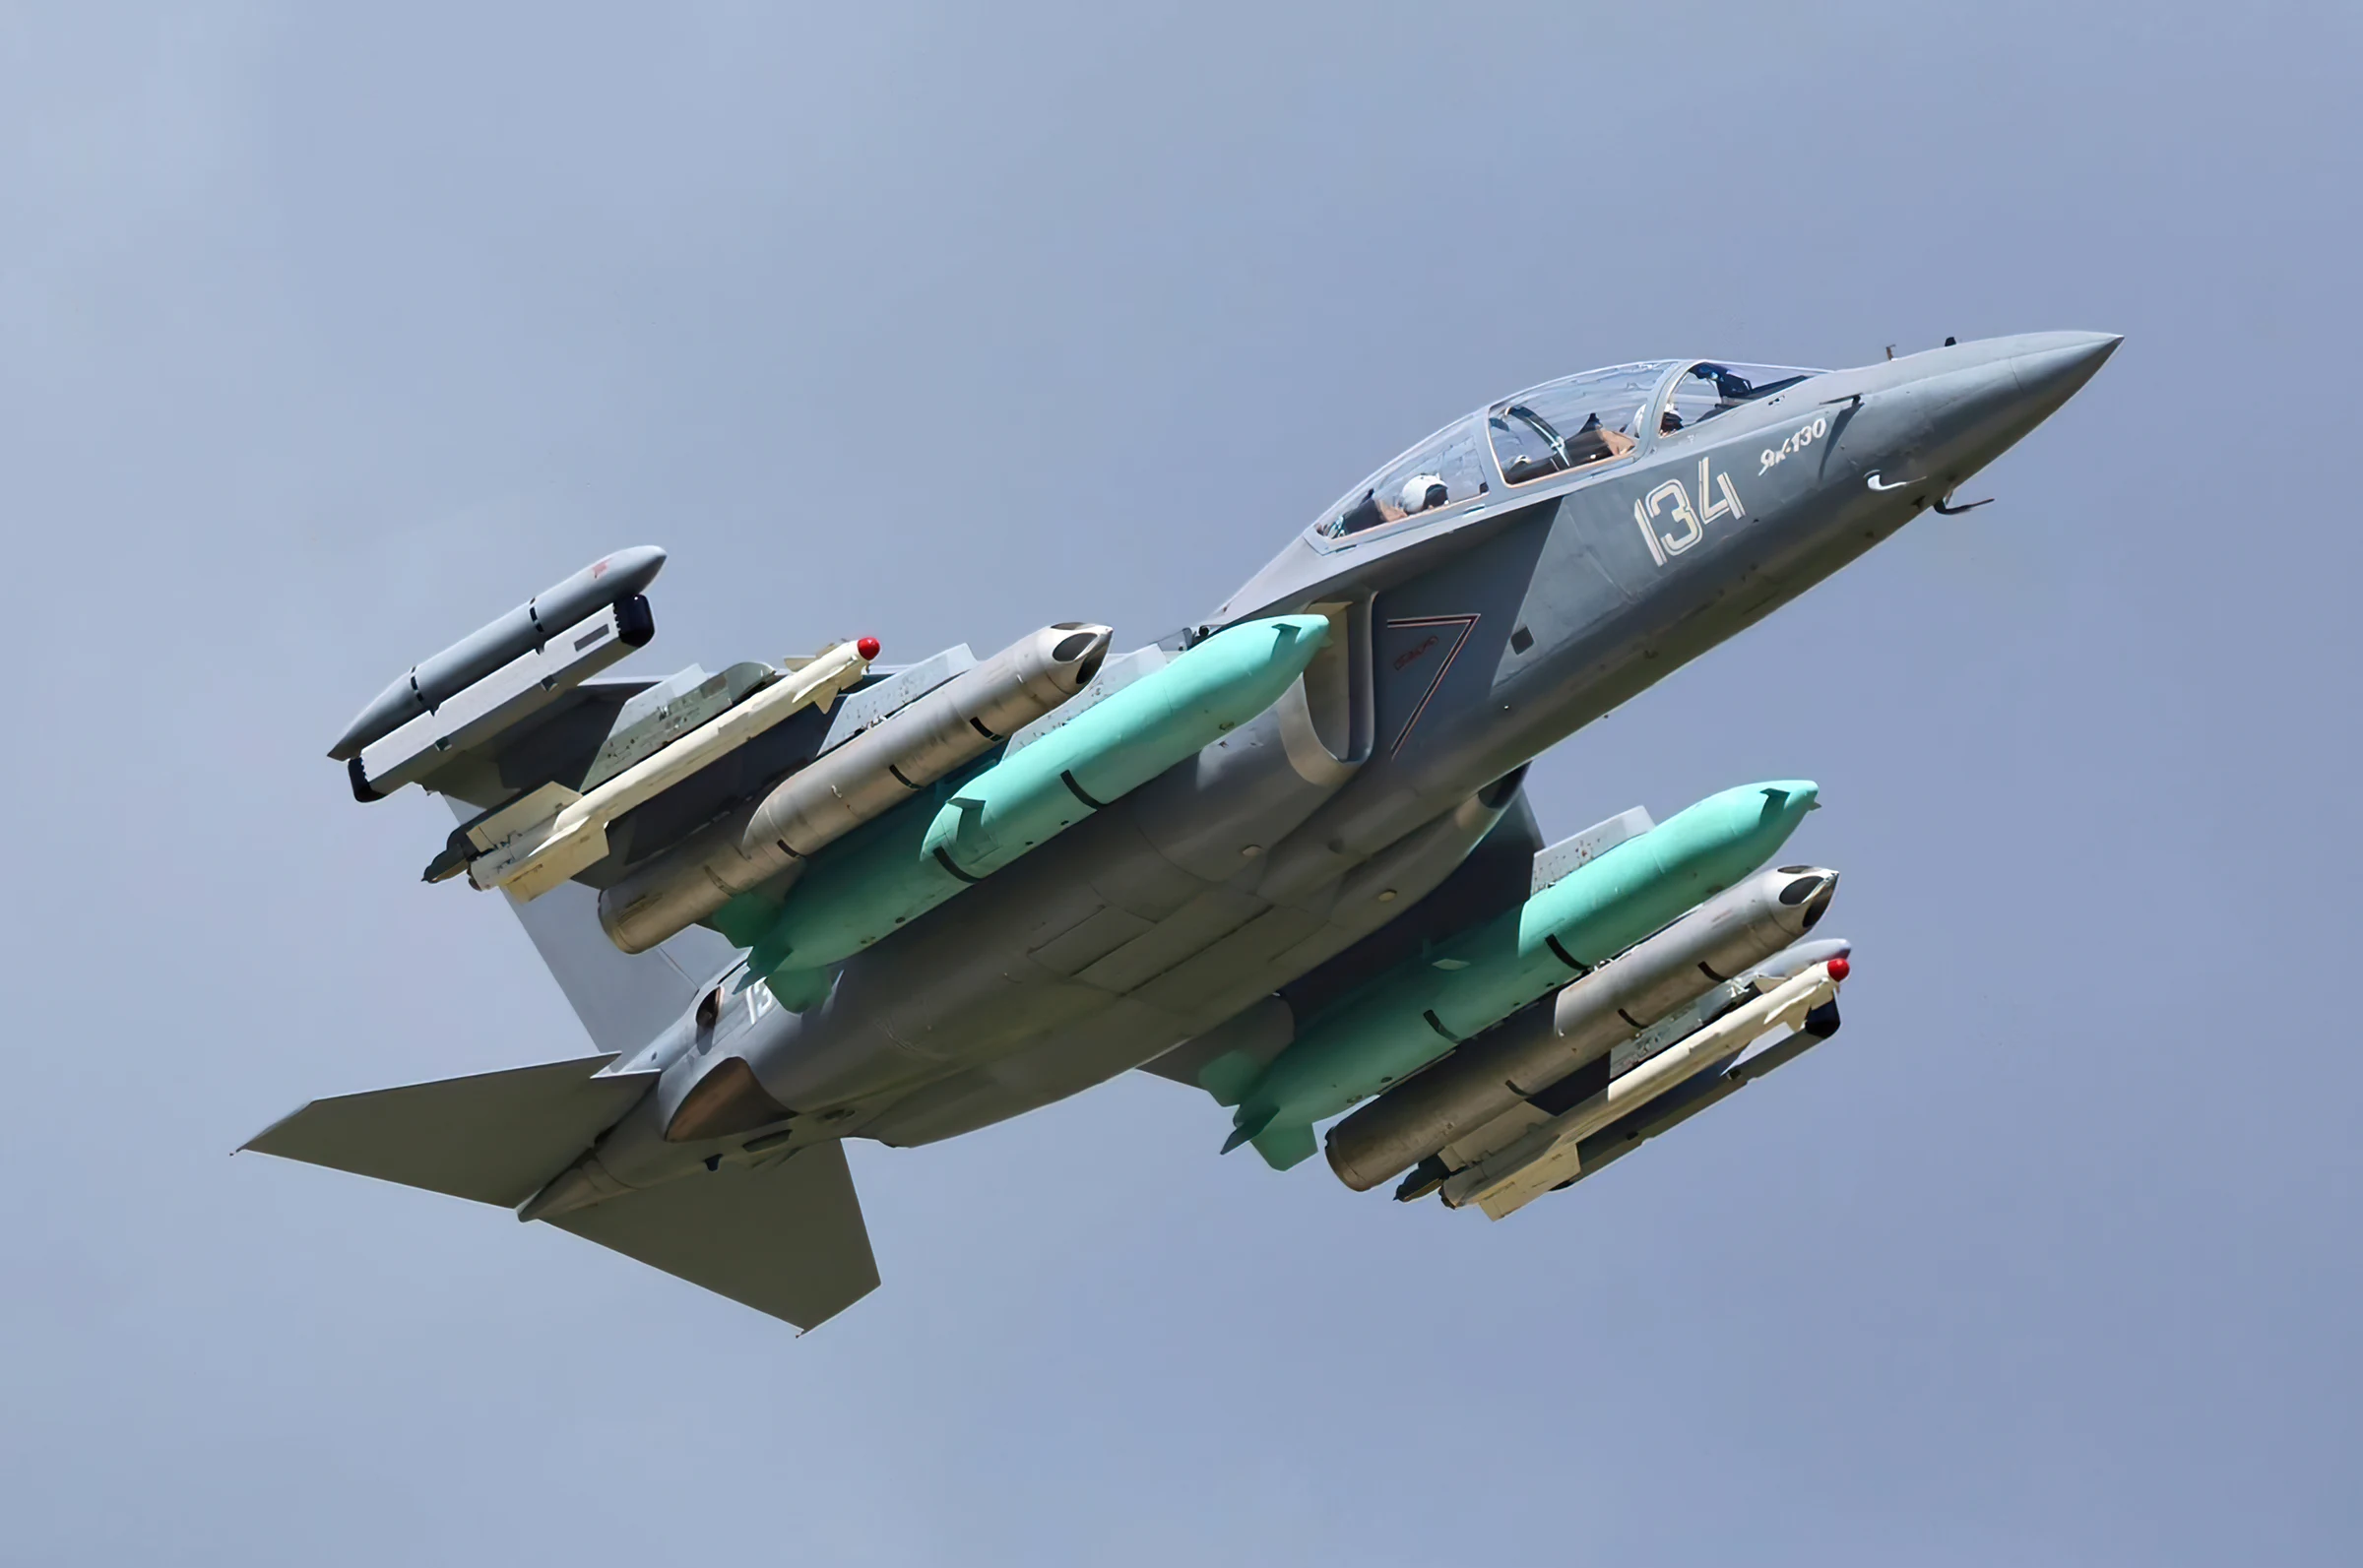 Russia reinforces Iran’s air force with the Iak-130 “Mitten”